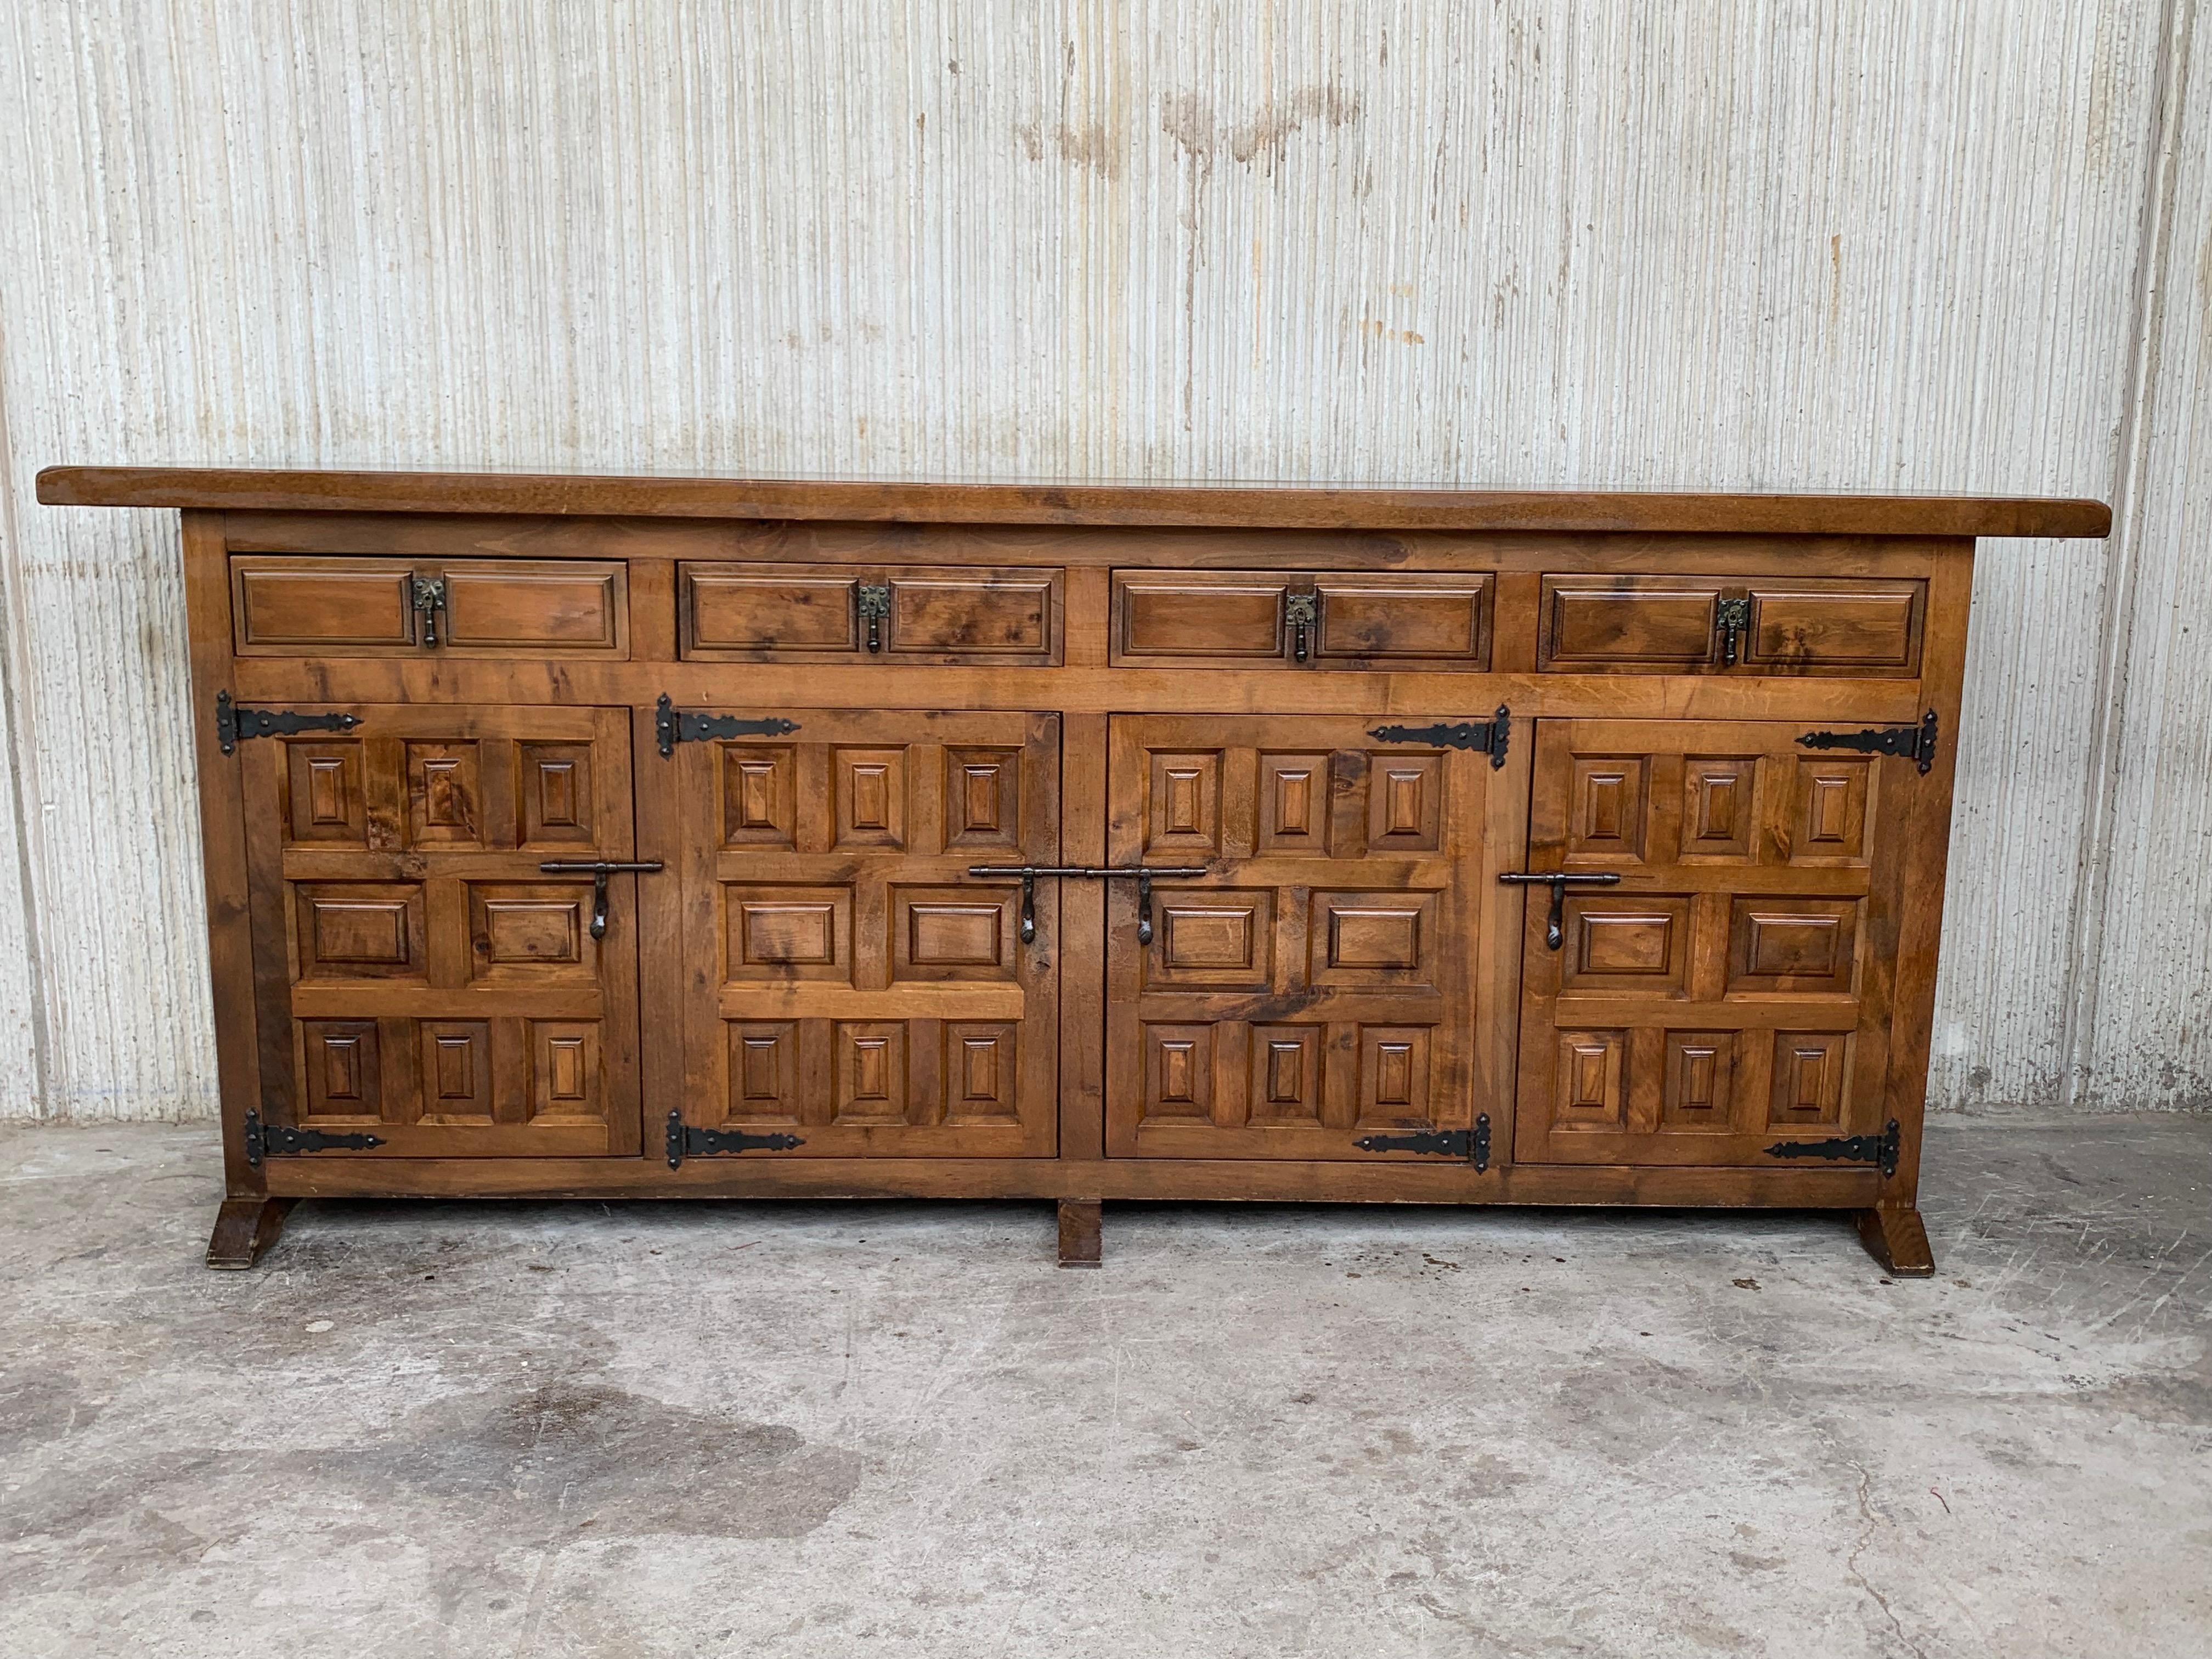 From Northern Spain, constructed of solid walnut, the rectangular top with molded edge atop a conforming case housing four drawers over four doors, the doors paneled with solid walnut, raised on a plinth base. The drawers and doors are hand carved